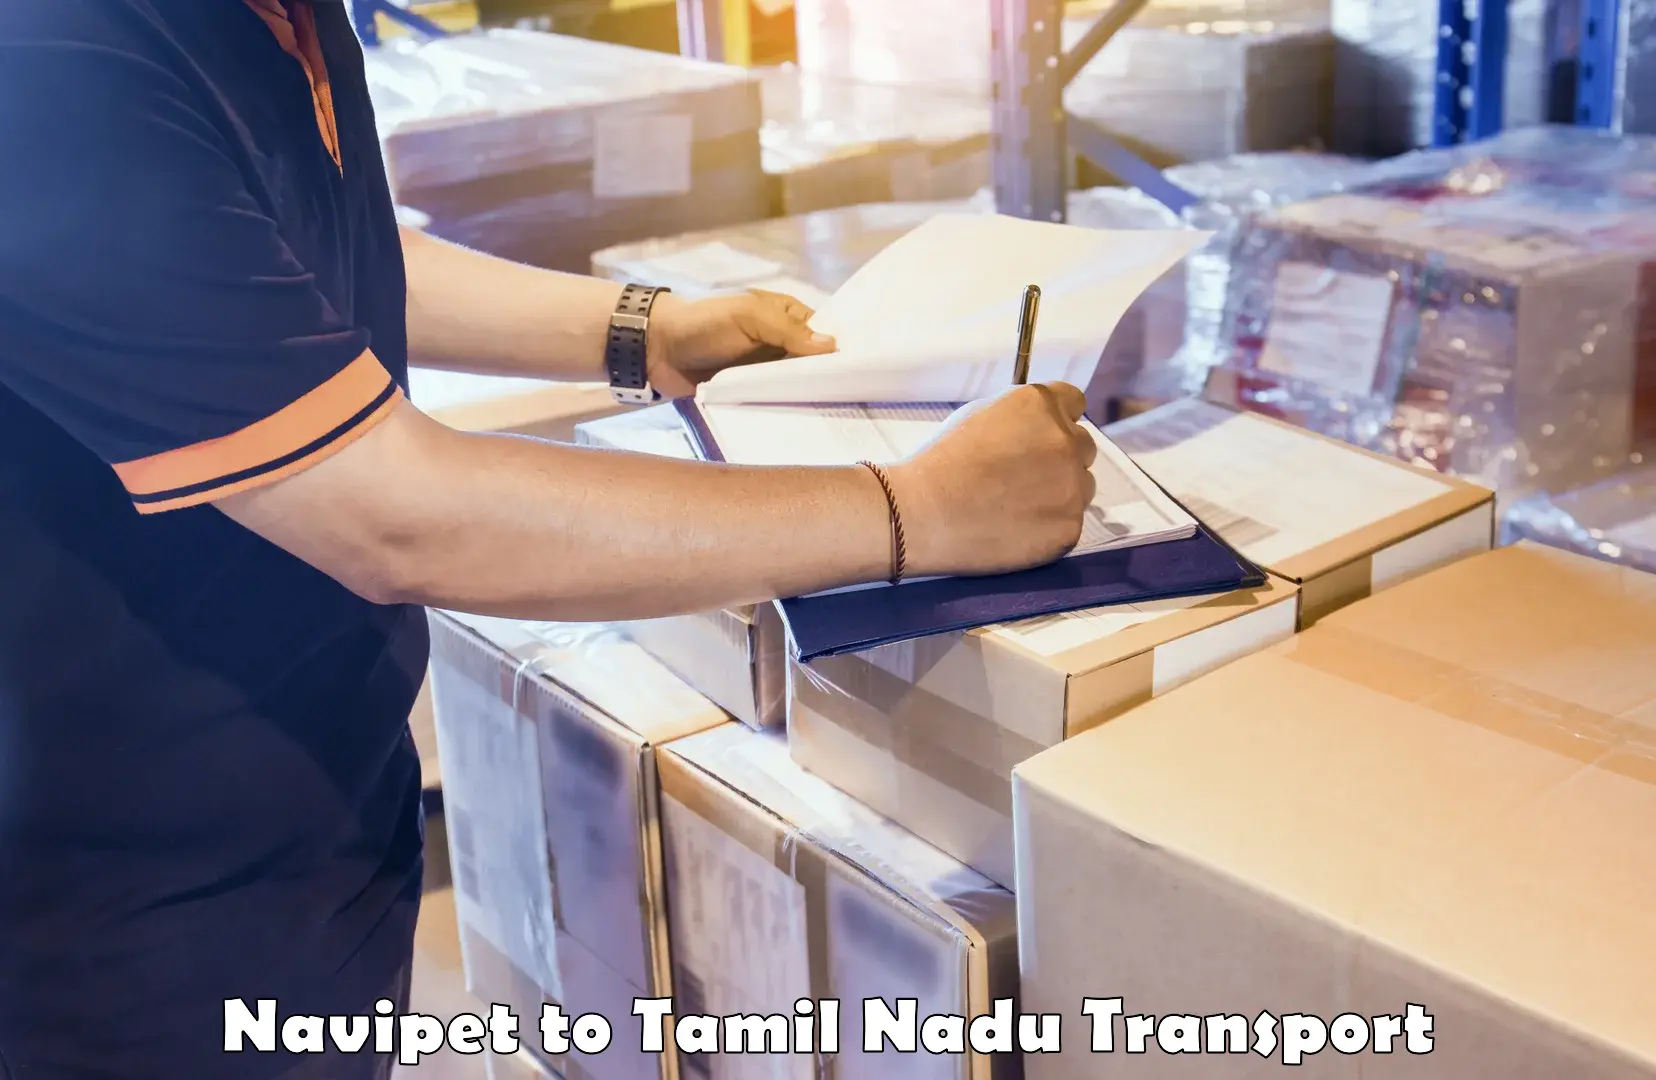 Commercial transport service Navipet to Vellore Institute of Technology